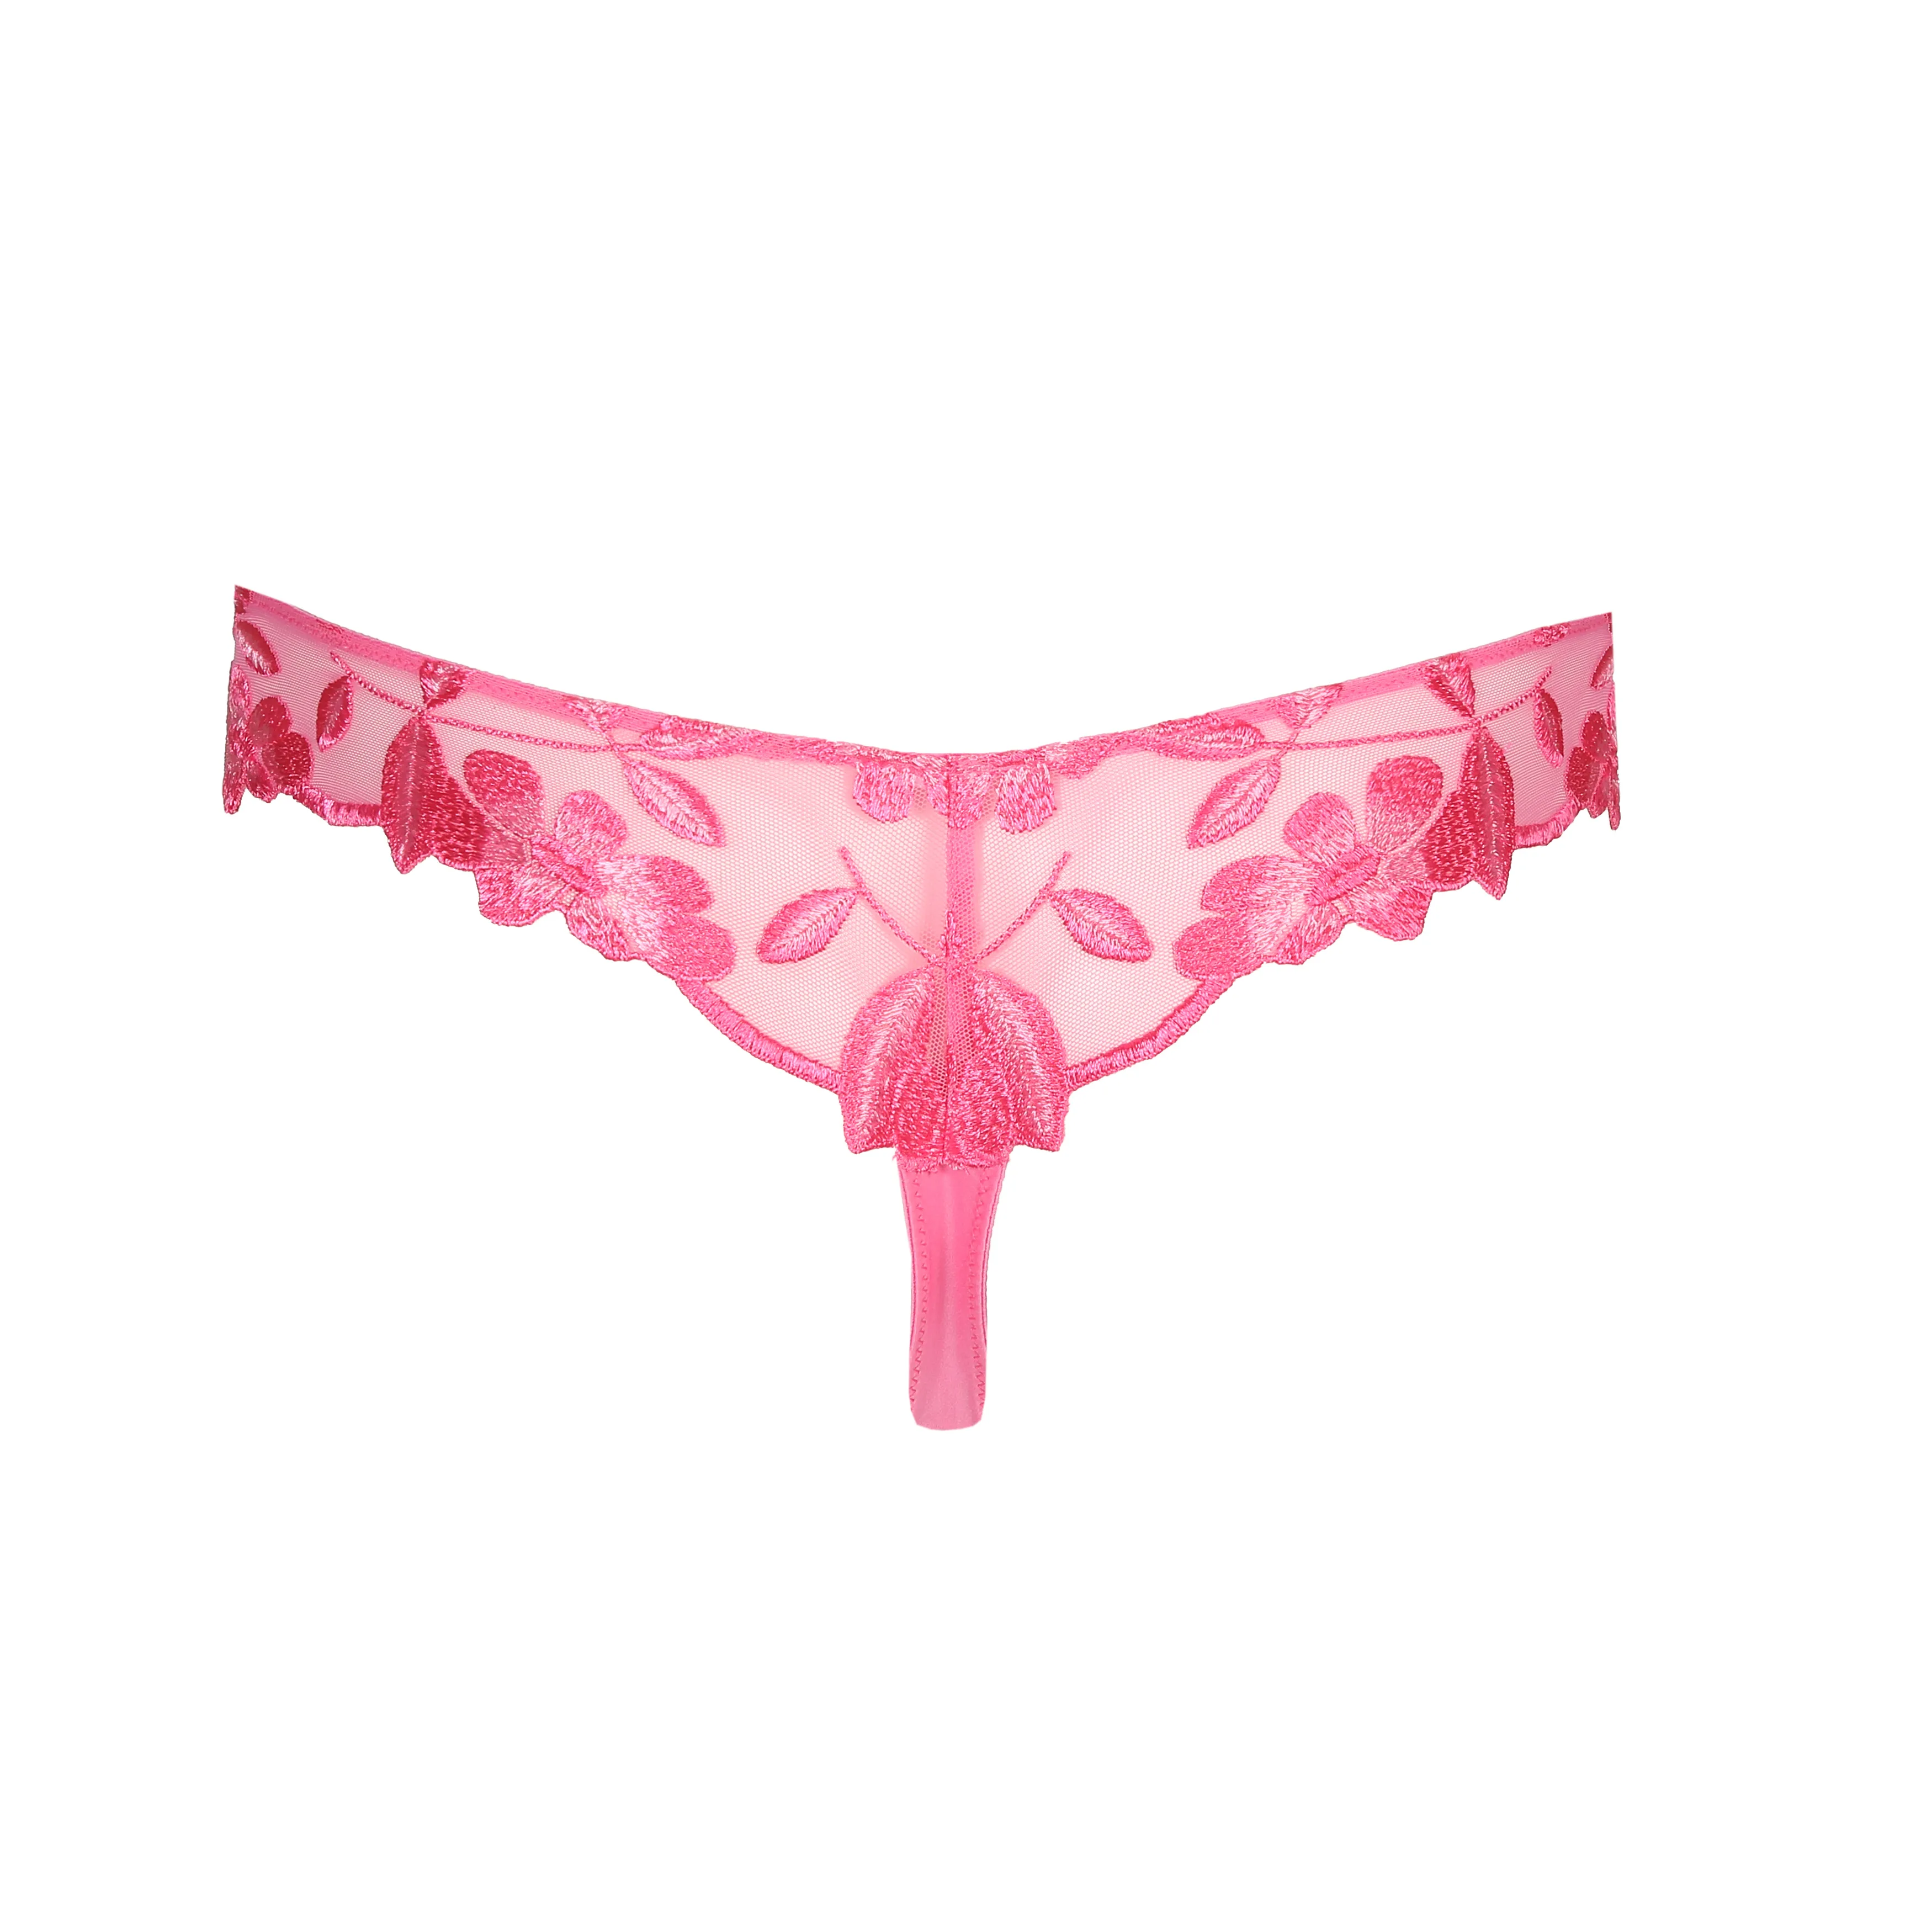 Marie Jo AGNES Paradise Pink thong